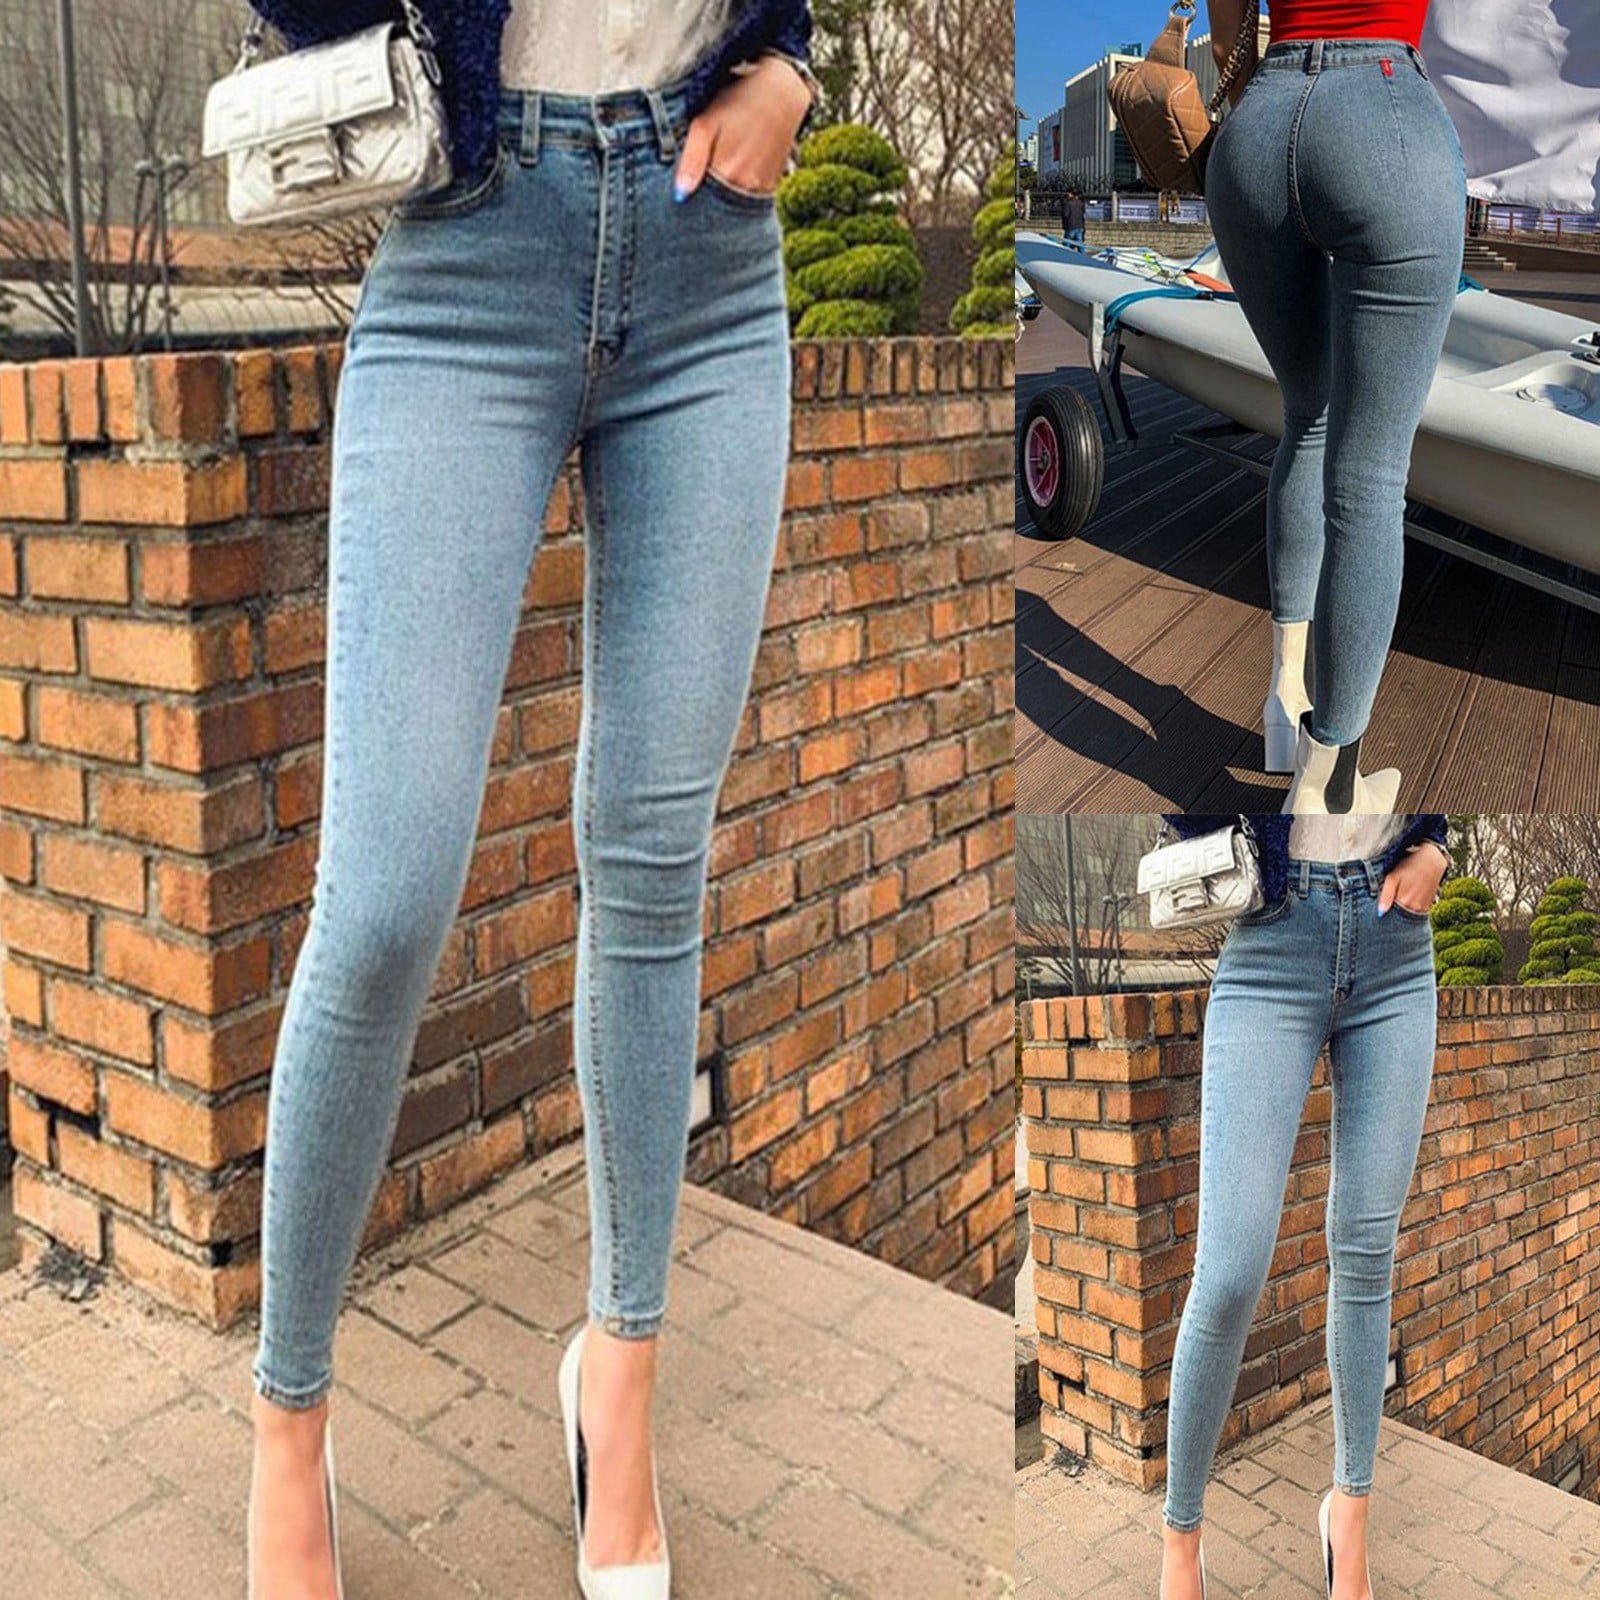 Kayannuo Pants for Women Jeans Fashion Christmas Clearance Women